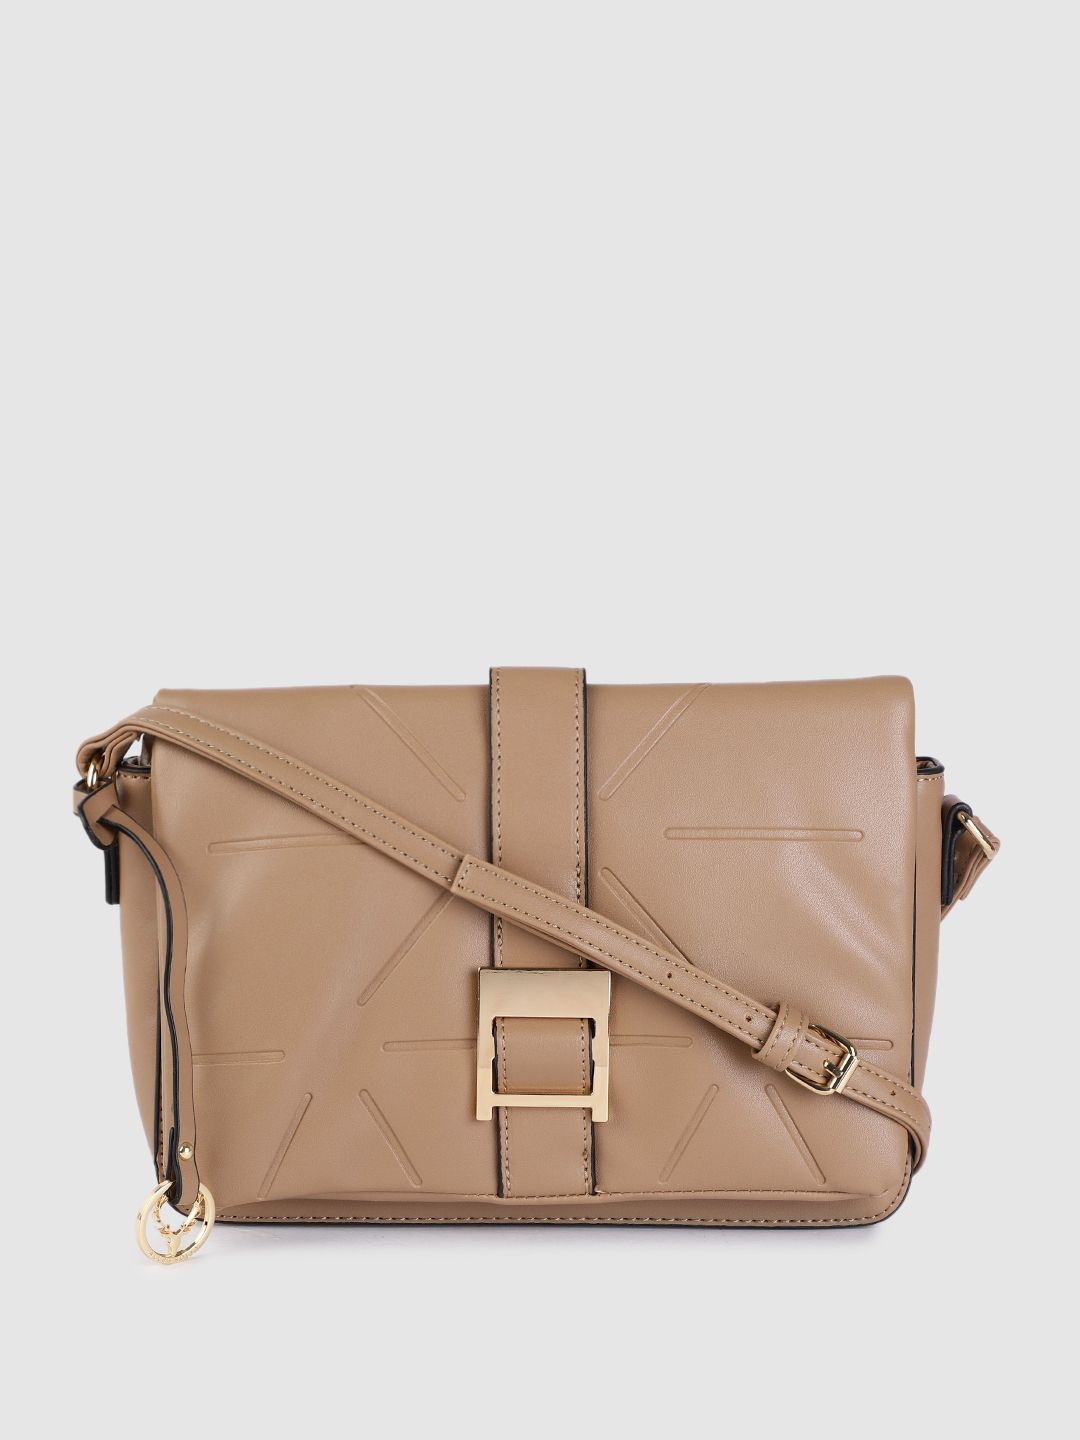 Allen Solly Brown Solid Sling Bag Price in India